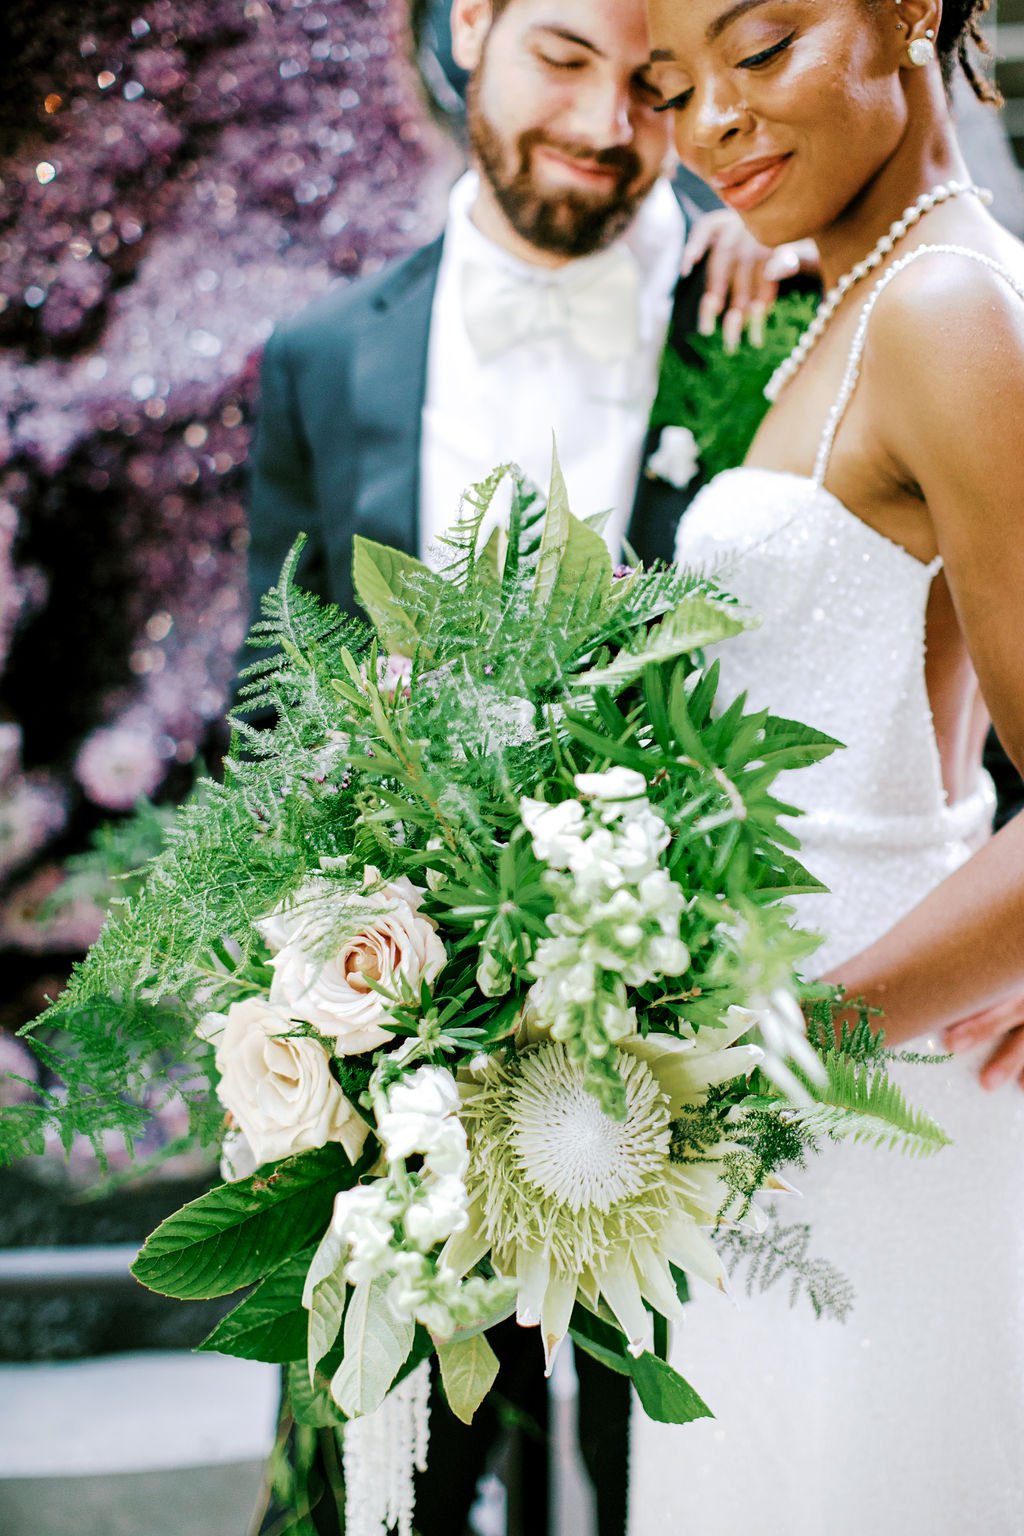 5-things-to-know-before-booking-your-wedding-florist-brought-to-you-by-savannah-wedding-planner-and-savannah-florist-ivory-and-beau-savannah-plant-riverside-district-savannah-wedding-savannah-bridal-shop-maggie-sottero-made-wiith-love-bridal-43.jpg